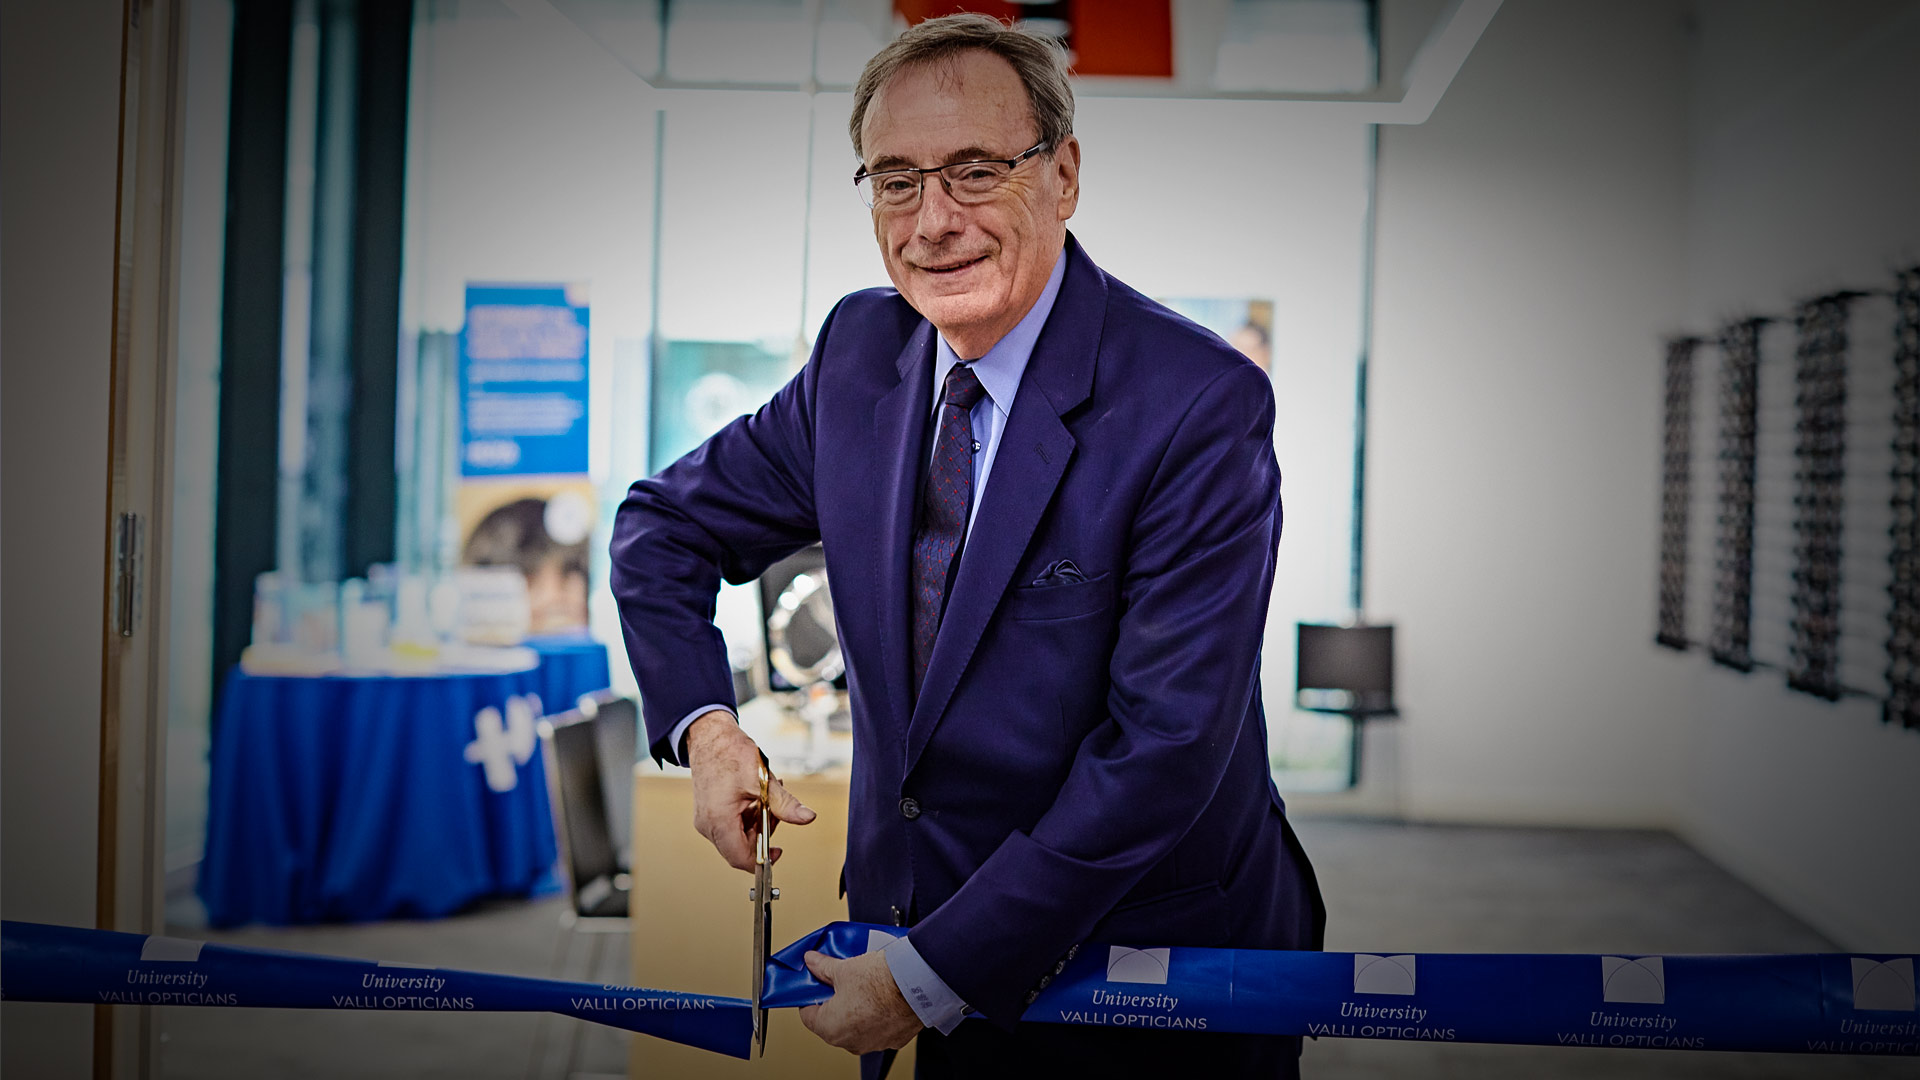 The University's Chancellor Sir George Buckley cut the ribbon before announcing University Valli Opticians officially 'open for business'